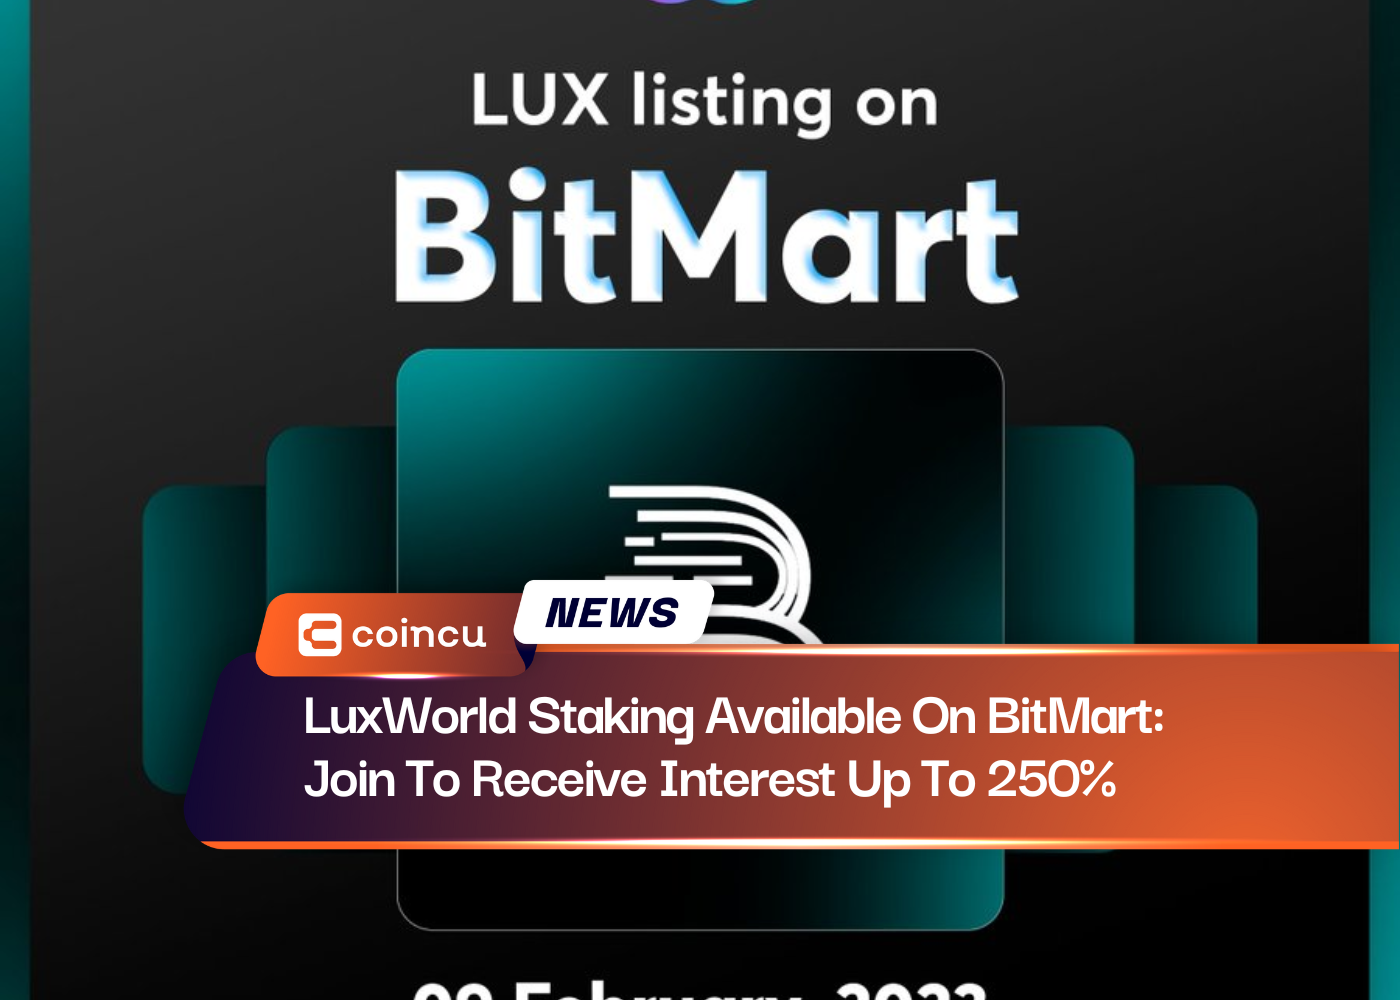 LuxWorld Staking Available On BitMart: Join To Receive Interest Up To 250%